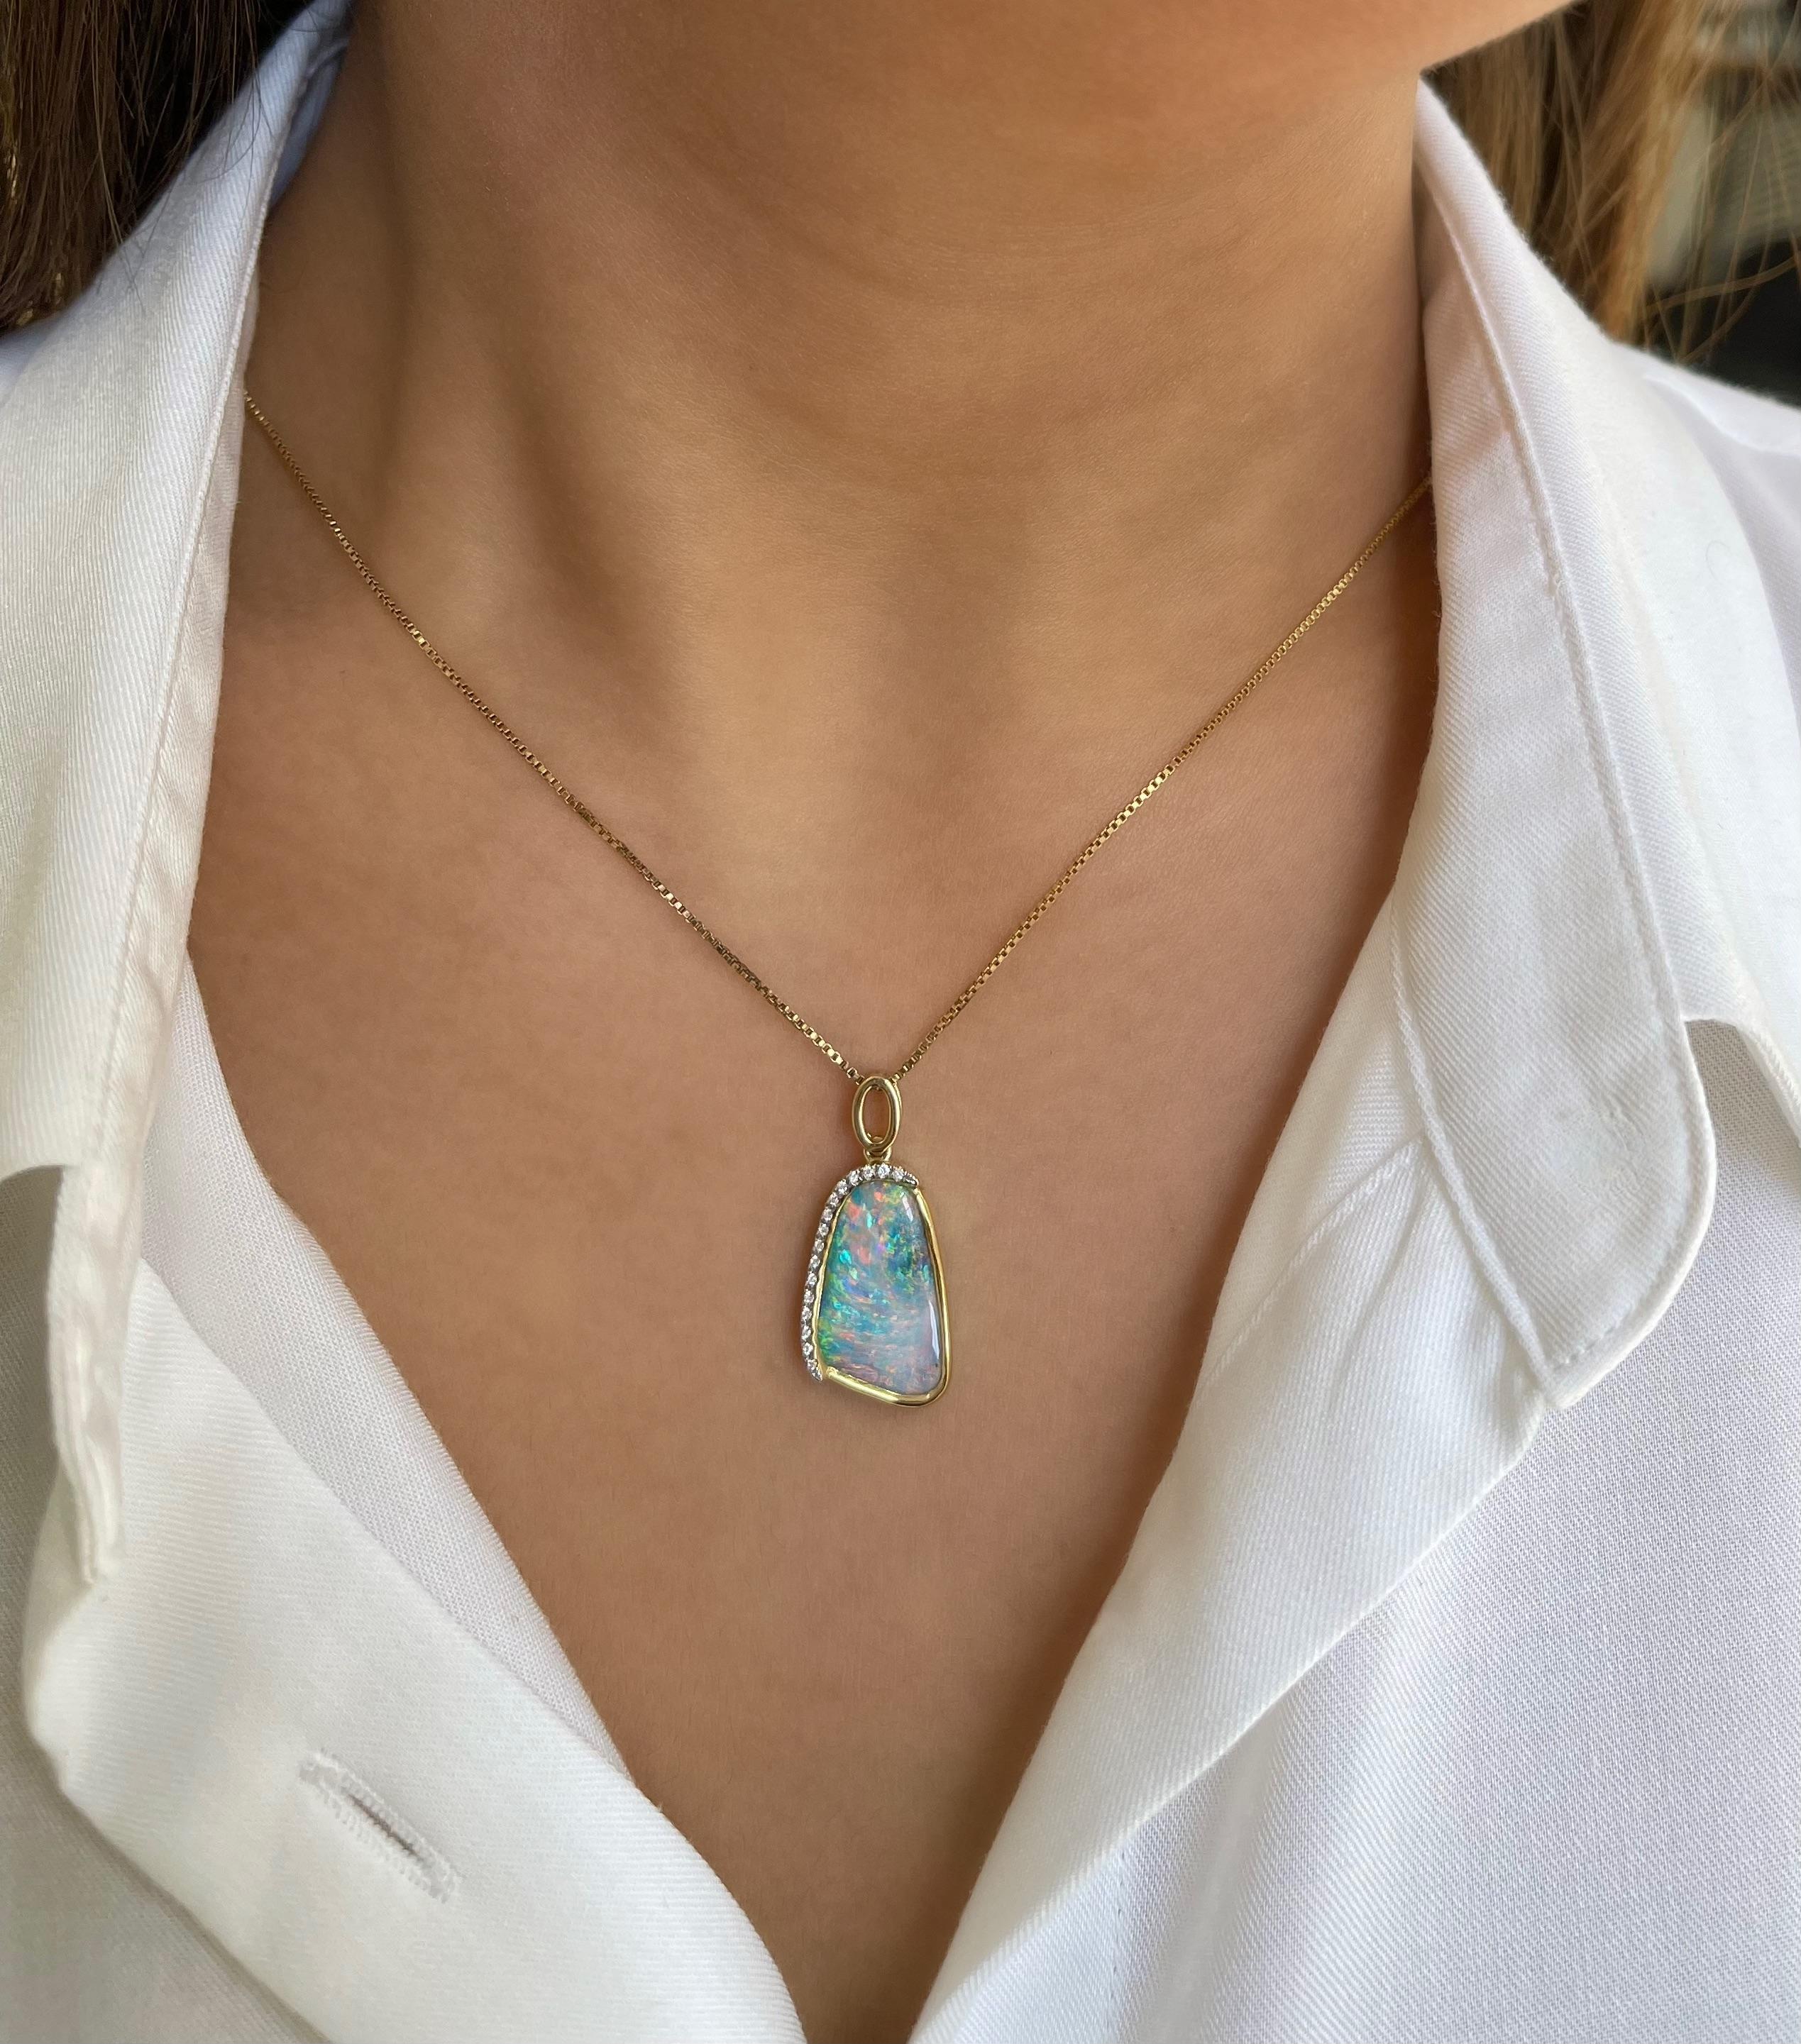 Extremely romantic and glamorous, ‘Madame Butterfly’ opal pendant features an attractive and versatile boulder opal (6.65ct) sourced from Winton mines in Queensland, Australia, bound to turn heads by its sheer beauty. Masterfully crafted in our